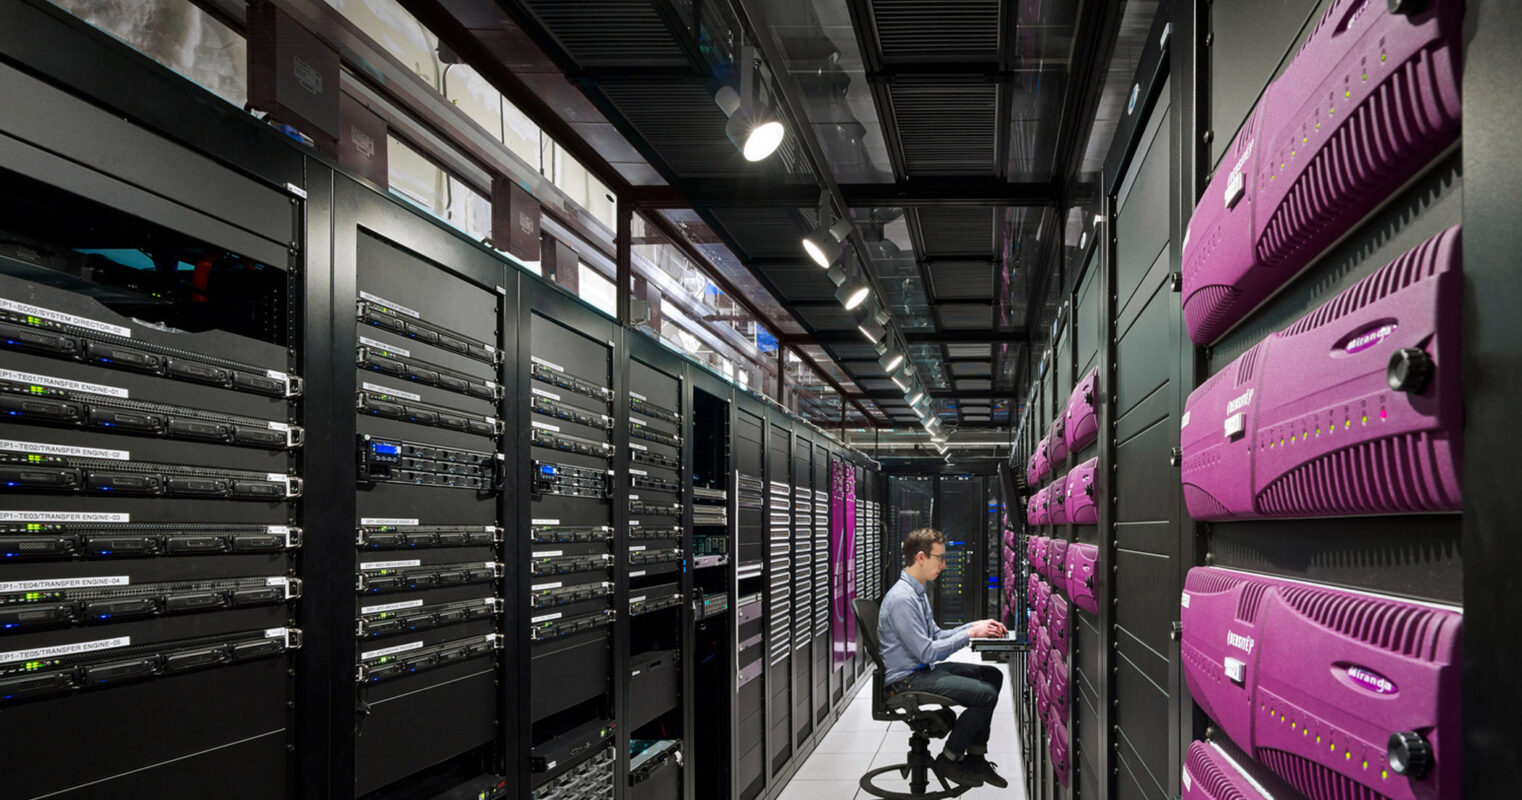 Modern data center interior with rows of purple server racks, leading lines creating depth, and cool lighting highlighting technological infrastructure. A professional sits attentively at a workstation, monitoring system performance and data integrity in a space optimized for efficiency and security.